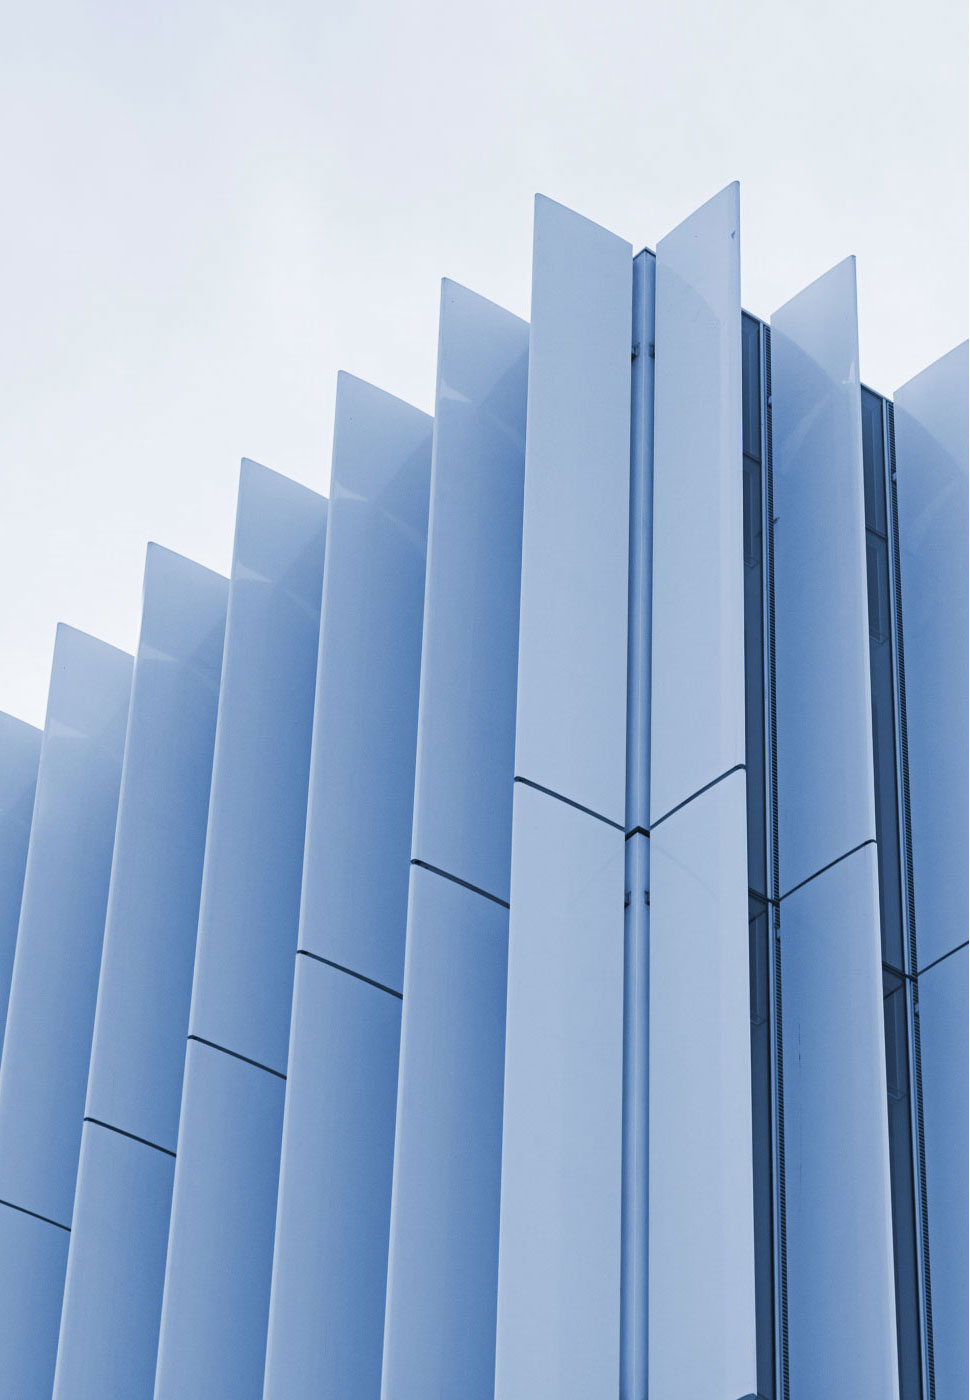 Photo of the corner of a light blue and black skyscraper building taken from below whose facade resembles an accordion.